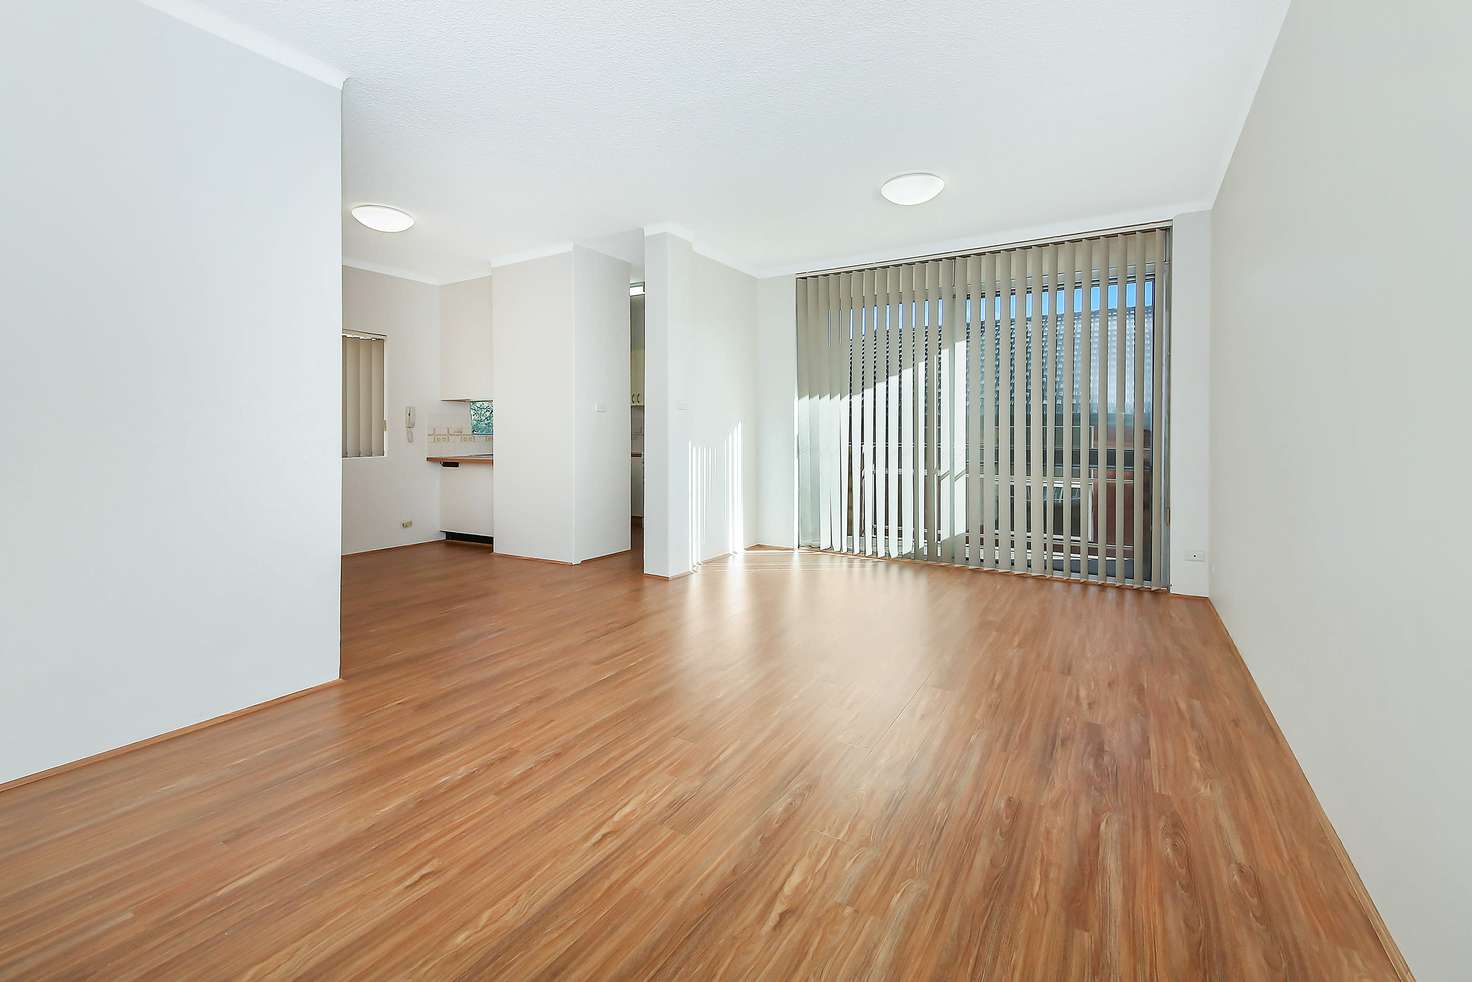 Main view of Homely apartment listing, 7/516 Railway Parade, Hurstville NSW 2220